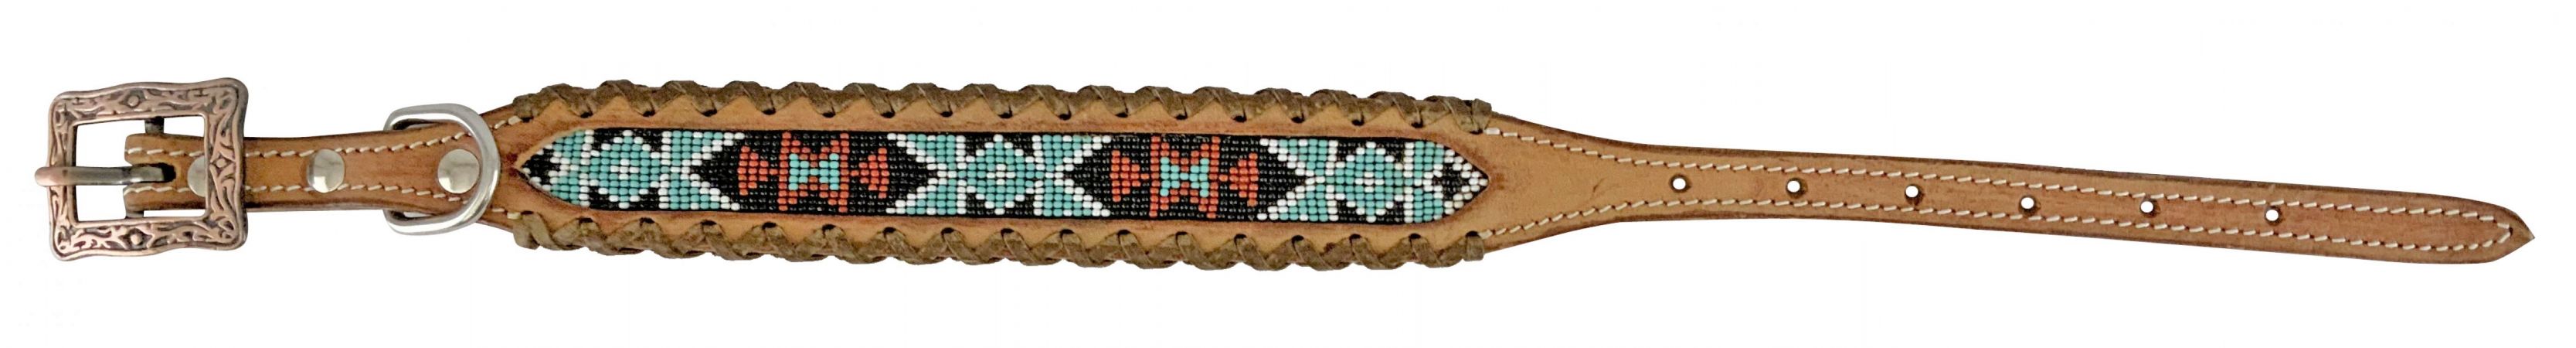 Showman Couture Genuine leather dog collar with beaded inlay - teal, white, and black